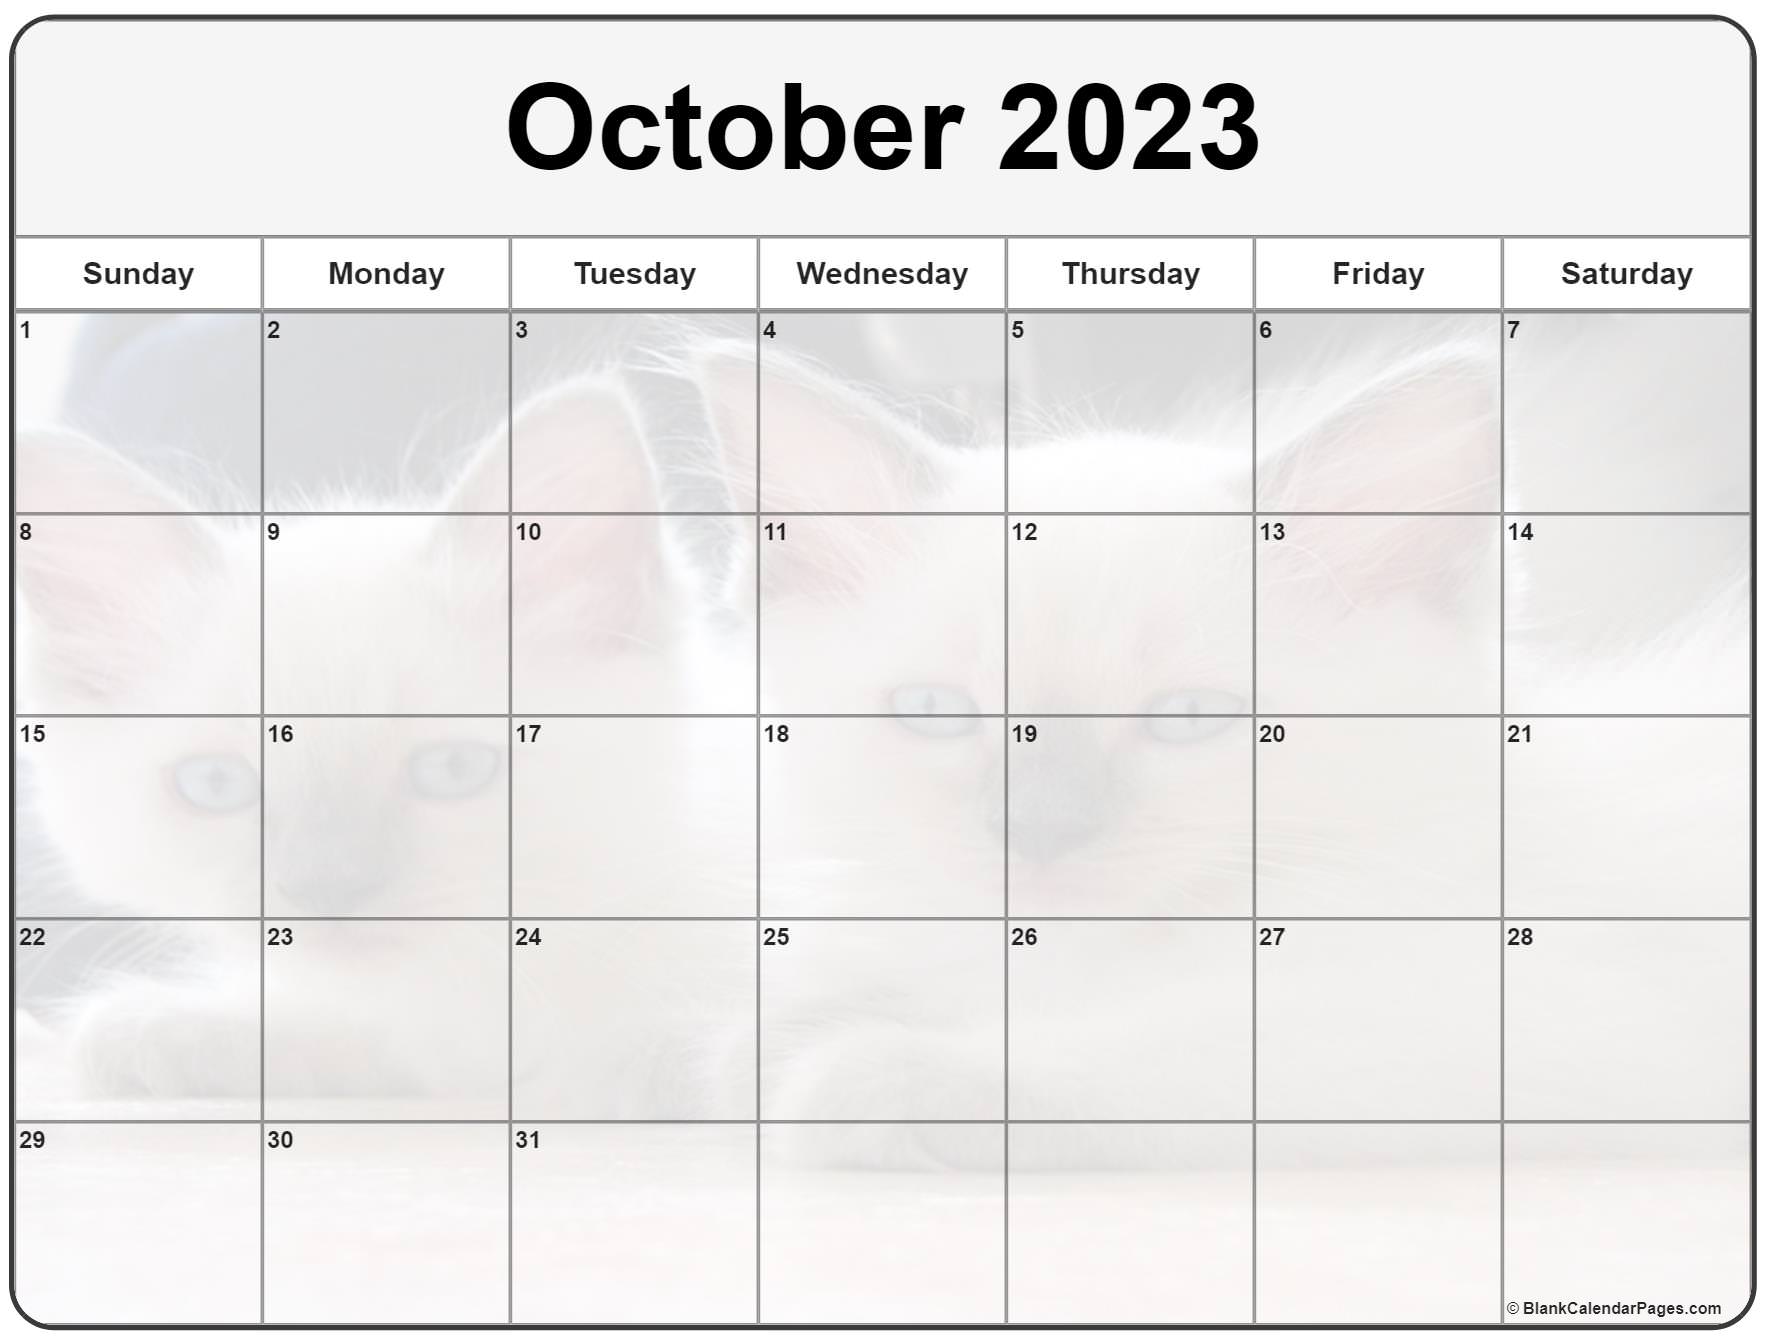 october-2023-calendar-of-the-month-free-printable-october-2023